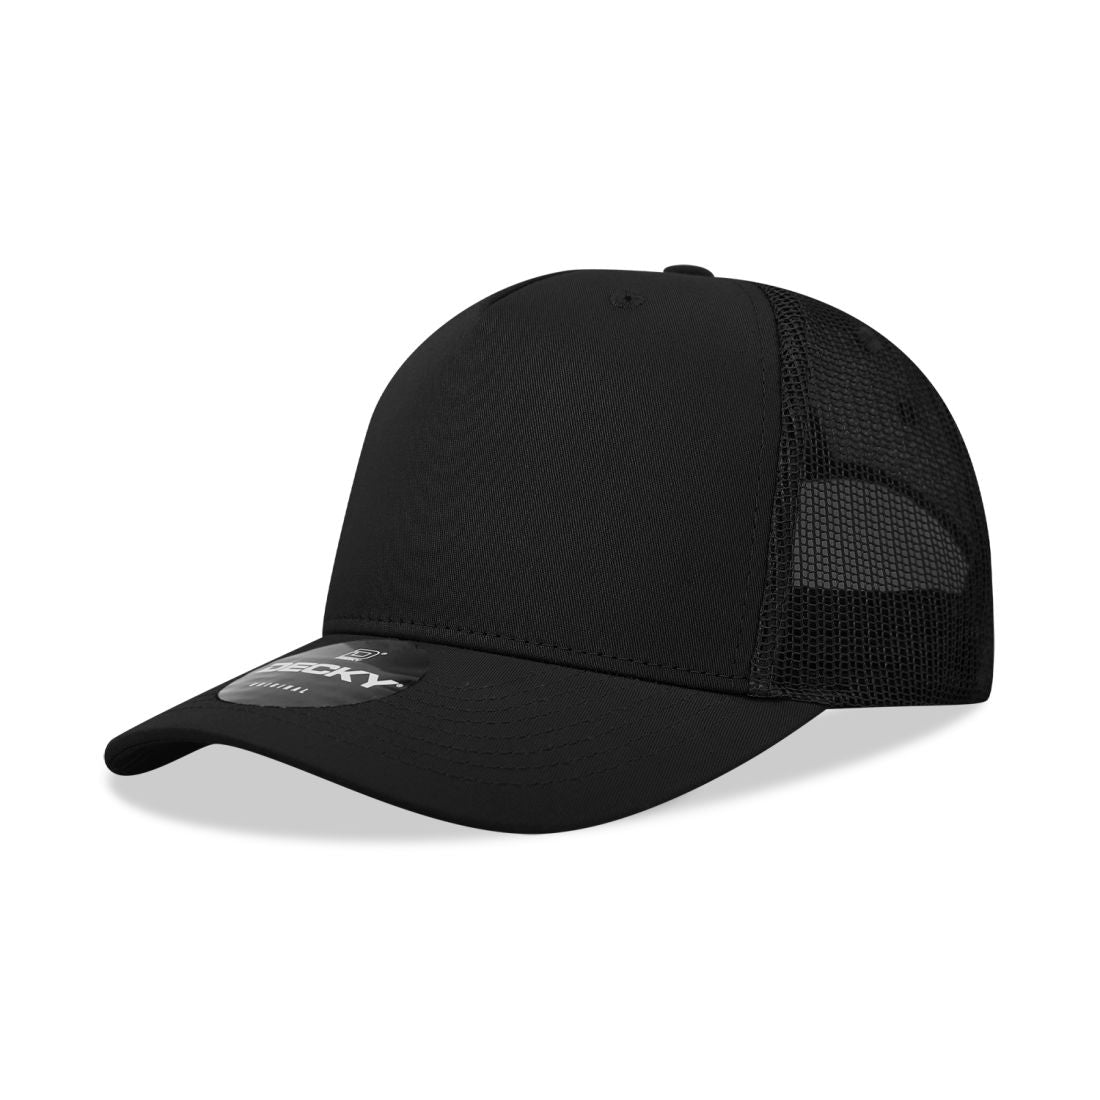 Trucker Structured Panel 5 Profile Decky 6030 Caps Hats Mid Cotton